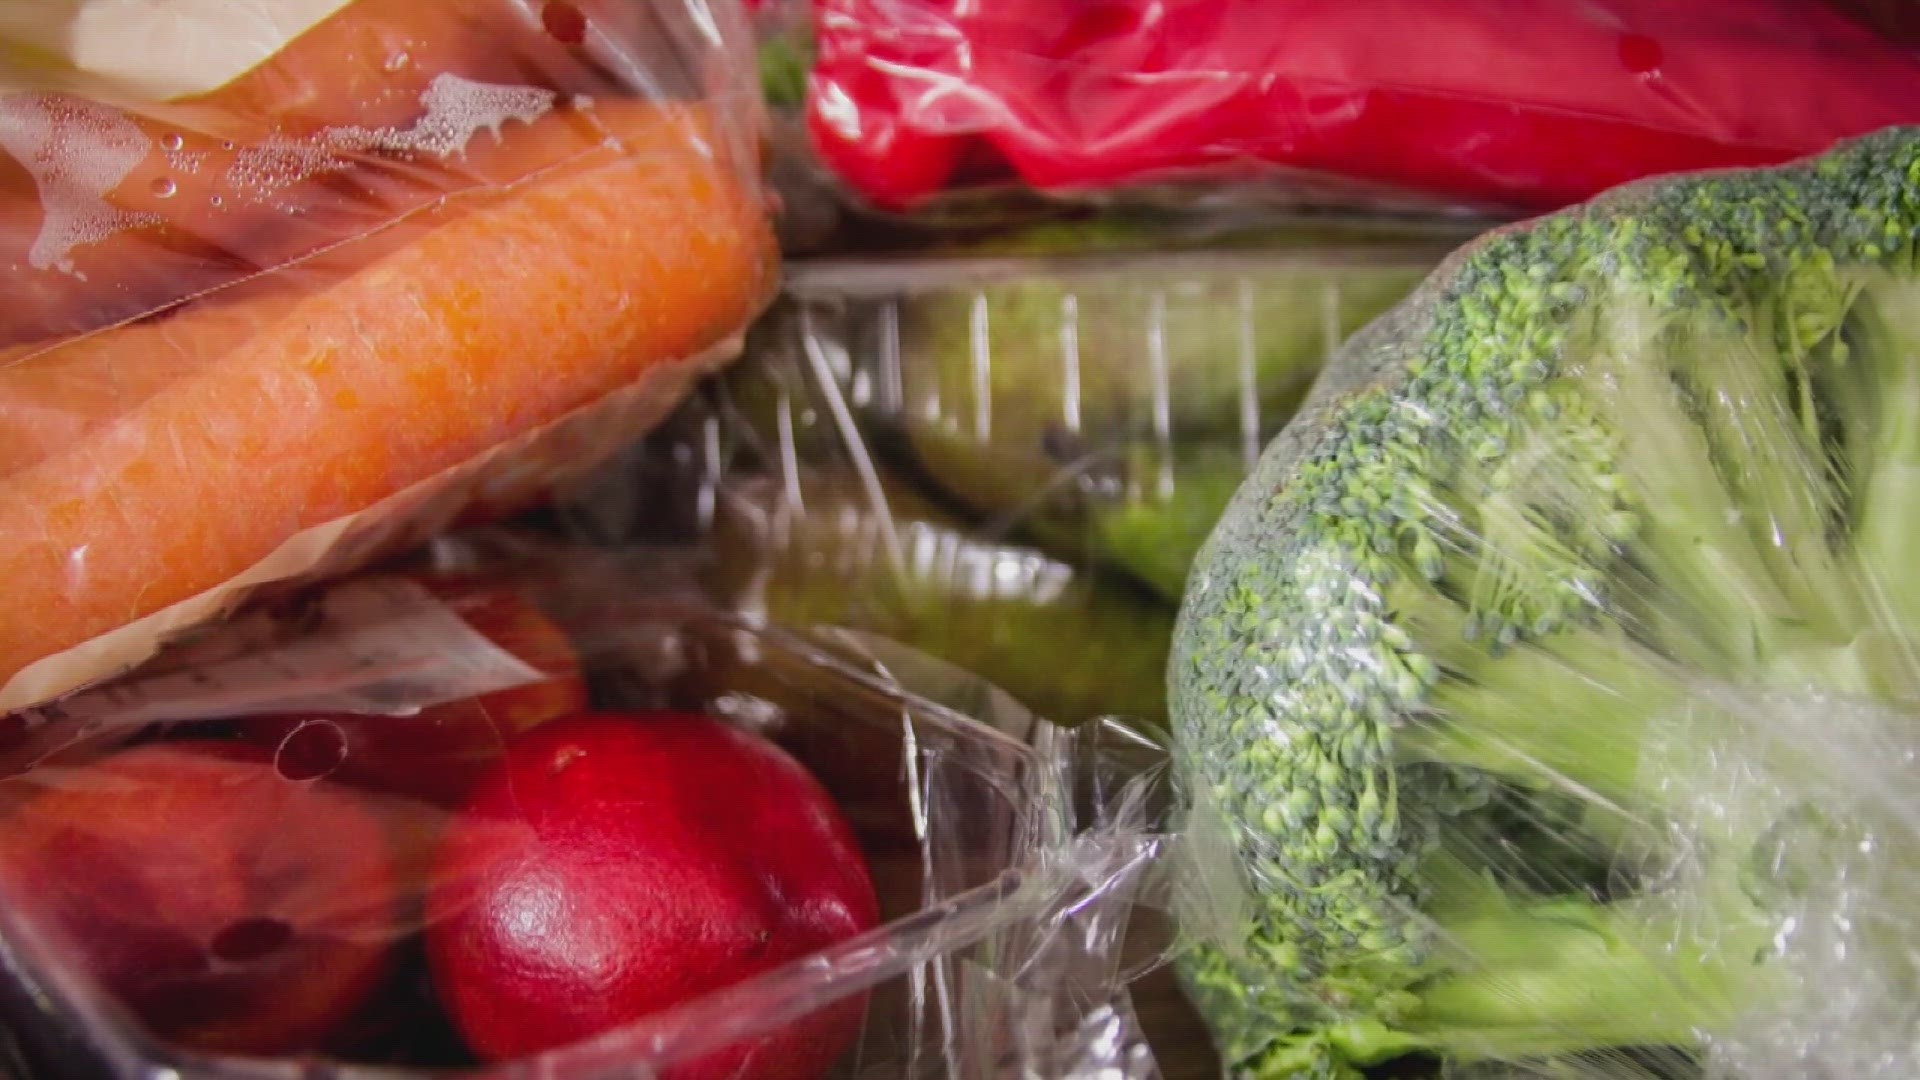 Our partners at Consumer Reports tested 85 different types of food for a chemical used to make plastic.